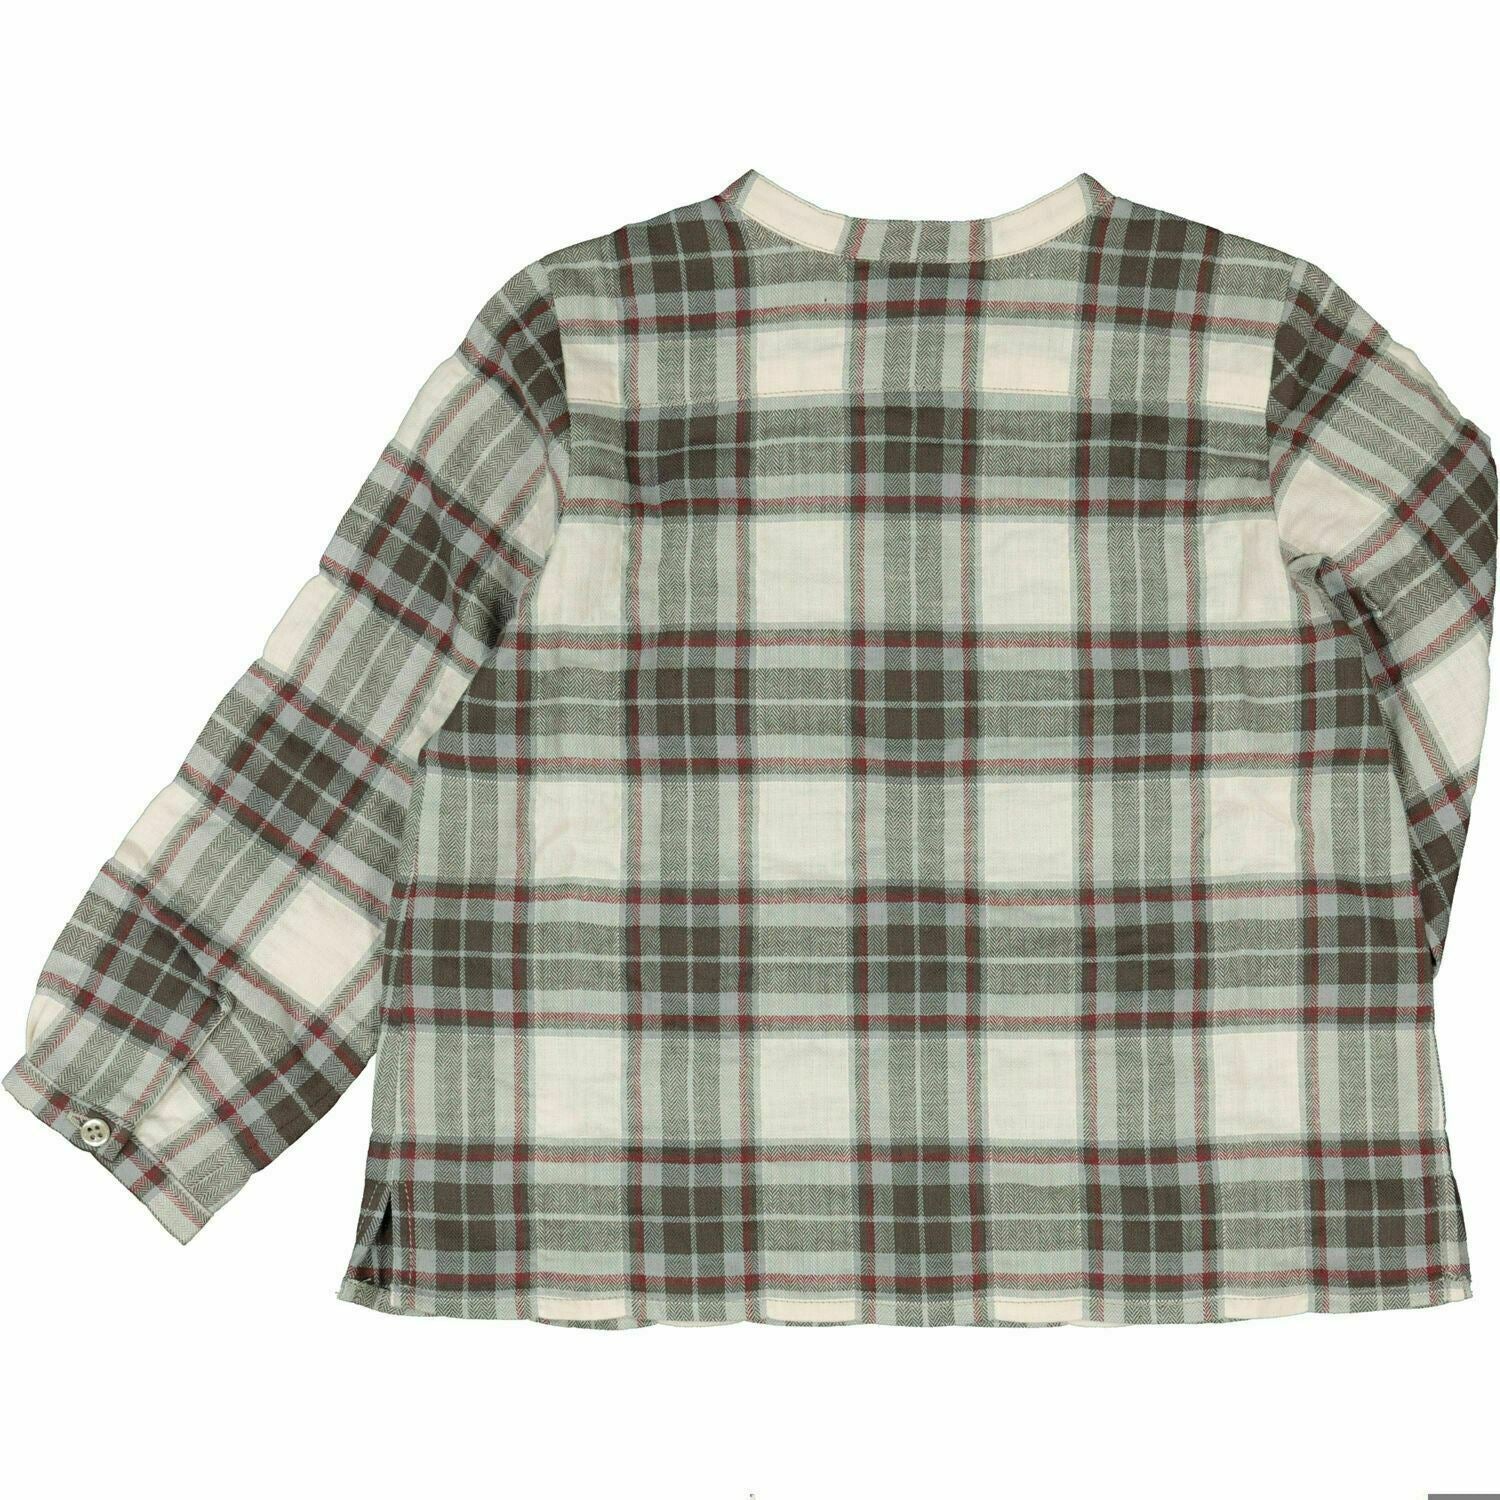 BONPOINT Baby Girls' Long Sleeve Checked Shirt Top, White/Red/Grey, 6 months